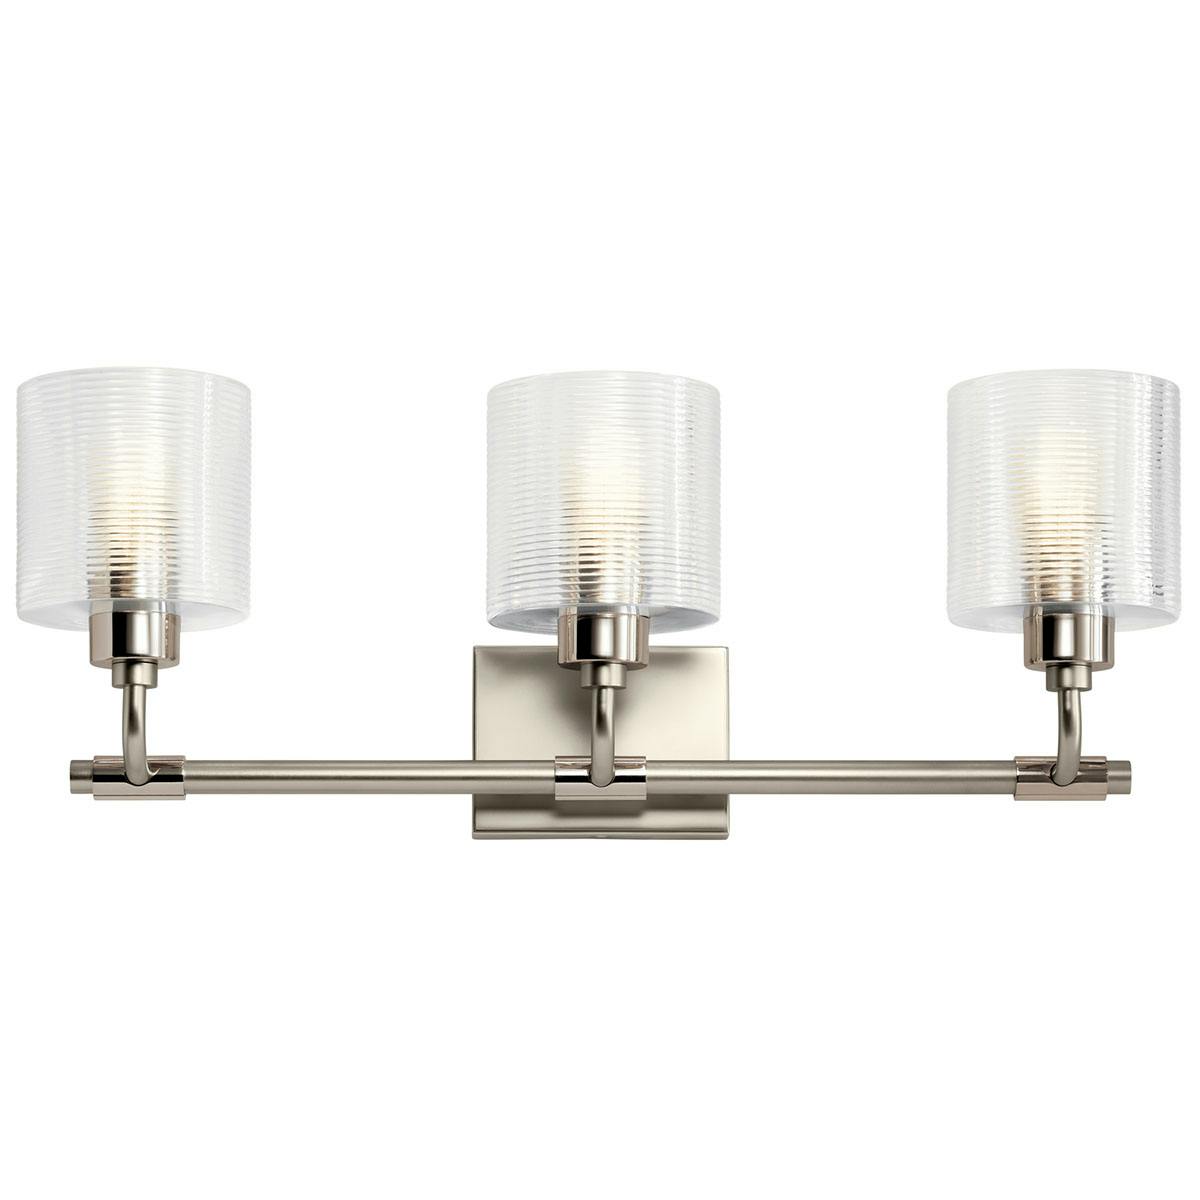 Front view of the Harvan 25" 3 Light Vanity Light Nickel on a white background